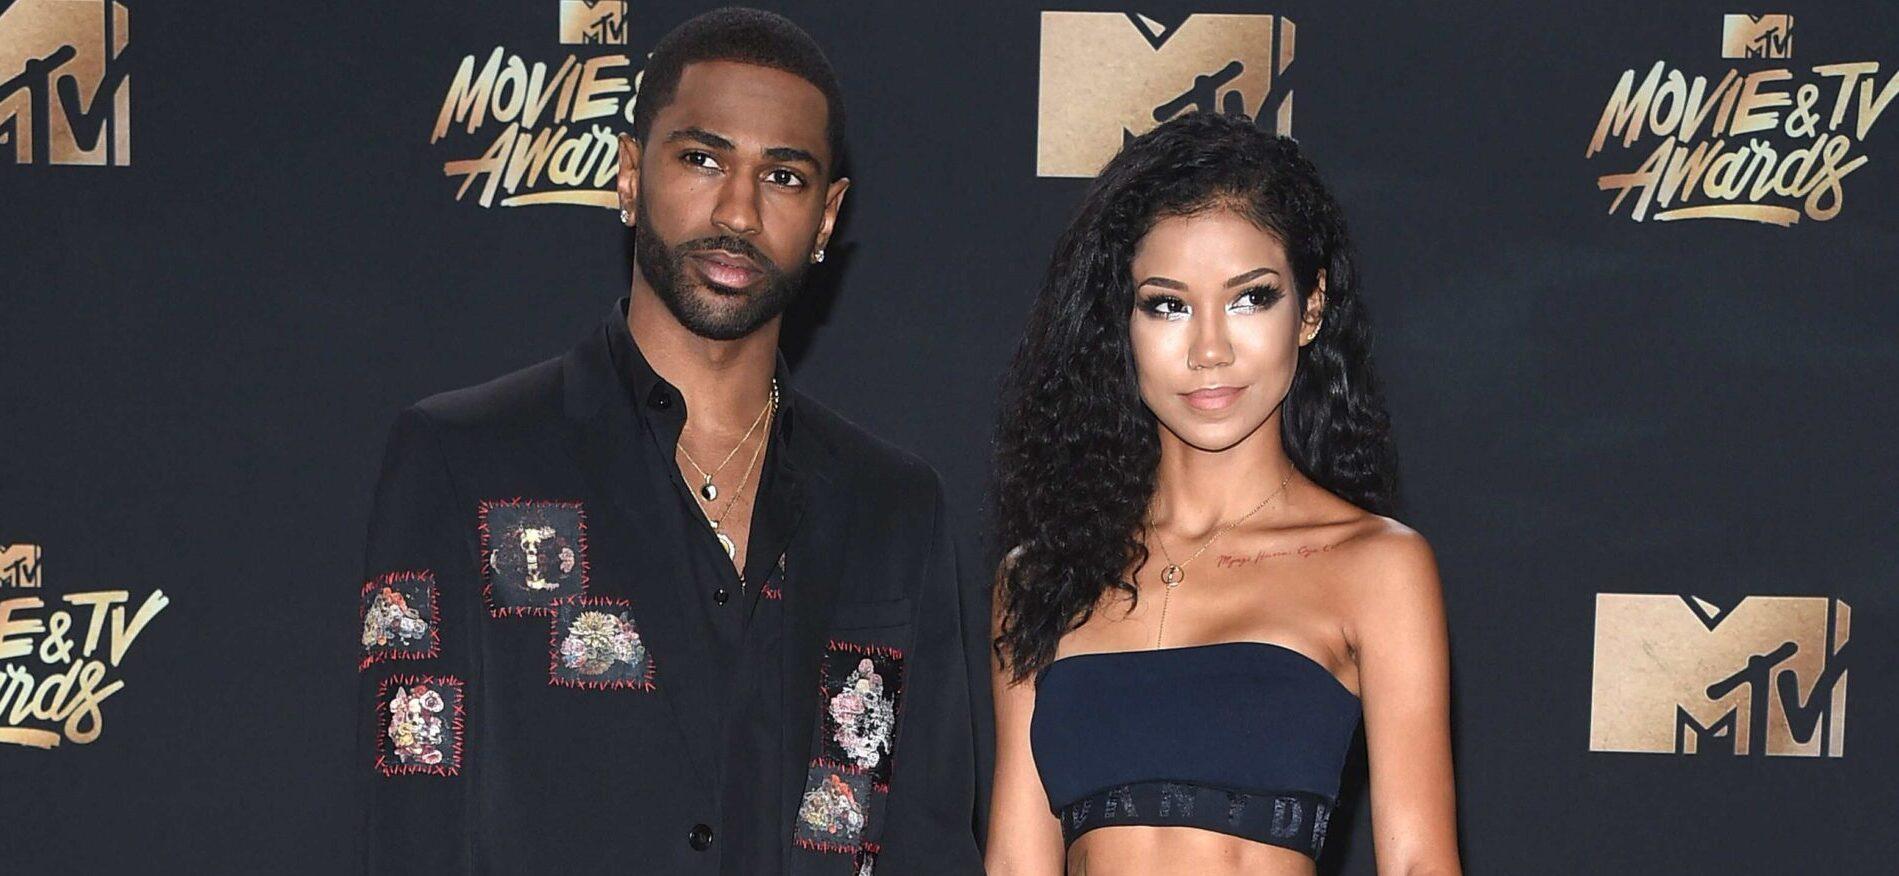 Big Sean and Jhene Aiko arrive at the 2017 MTV Movie and TV Awards in Los Angeles